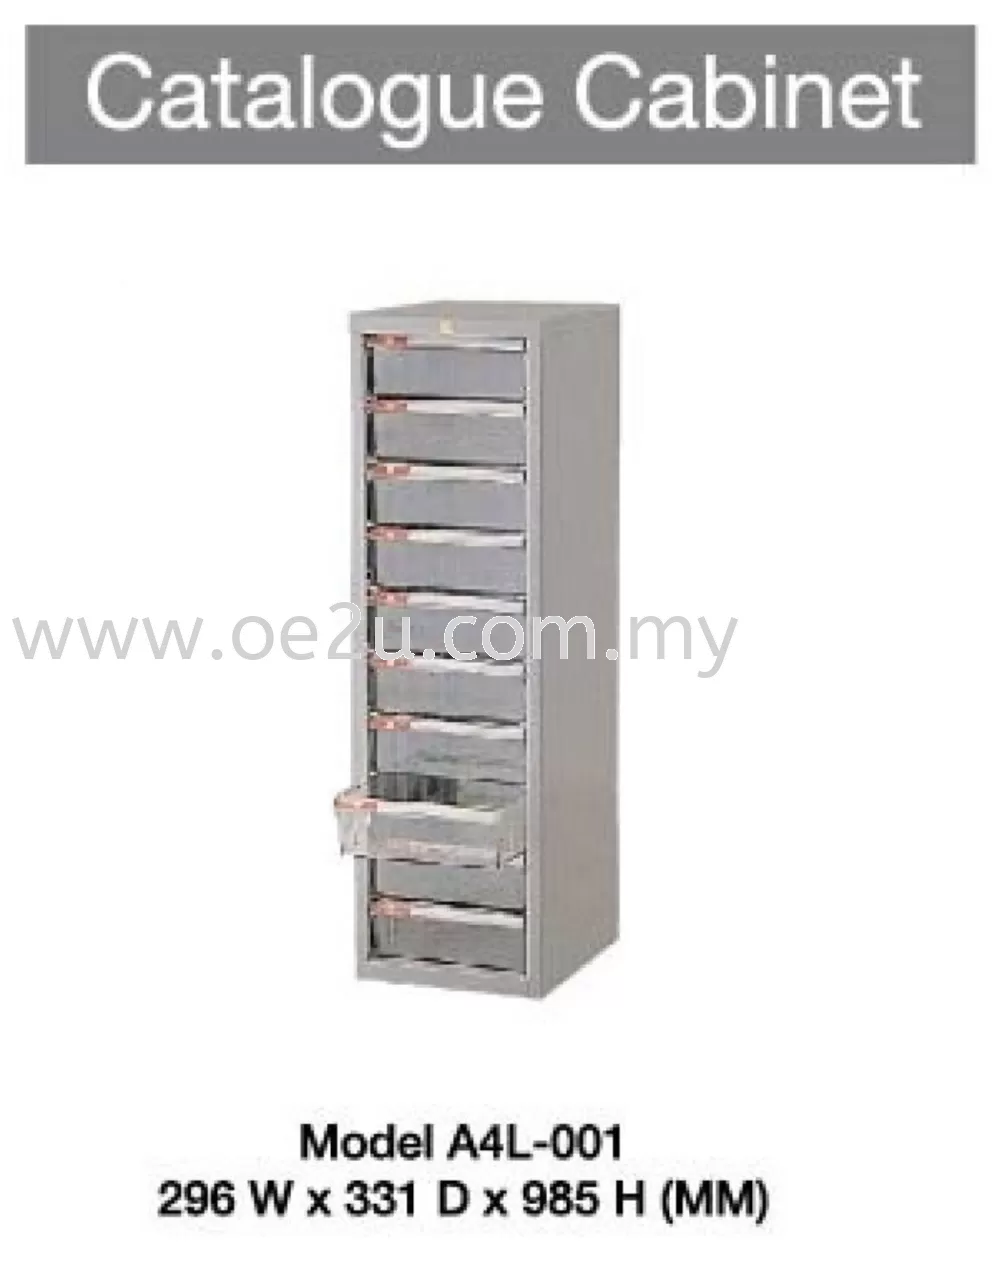 Catalogue Cabinet (1 Section)